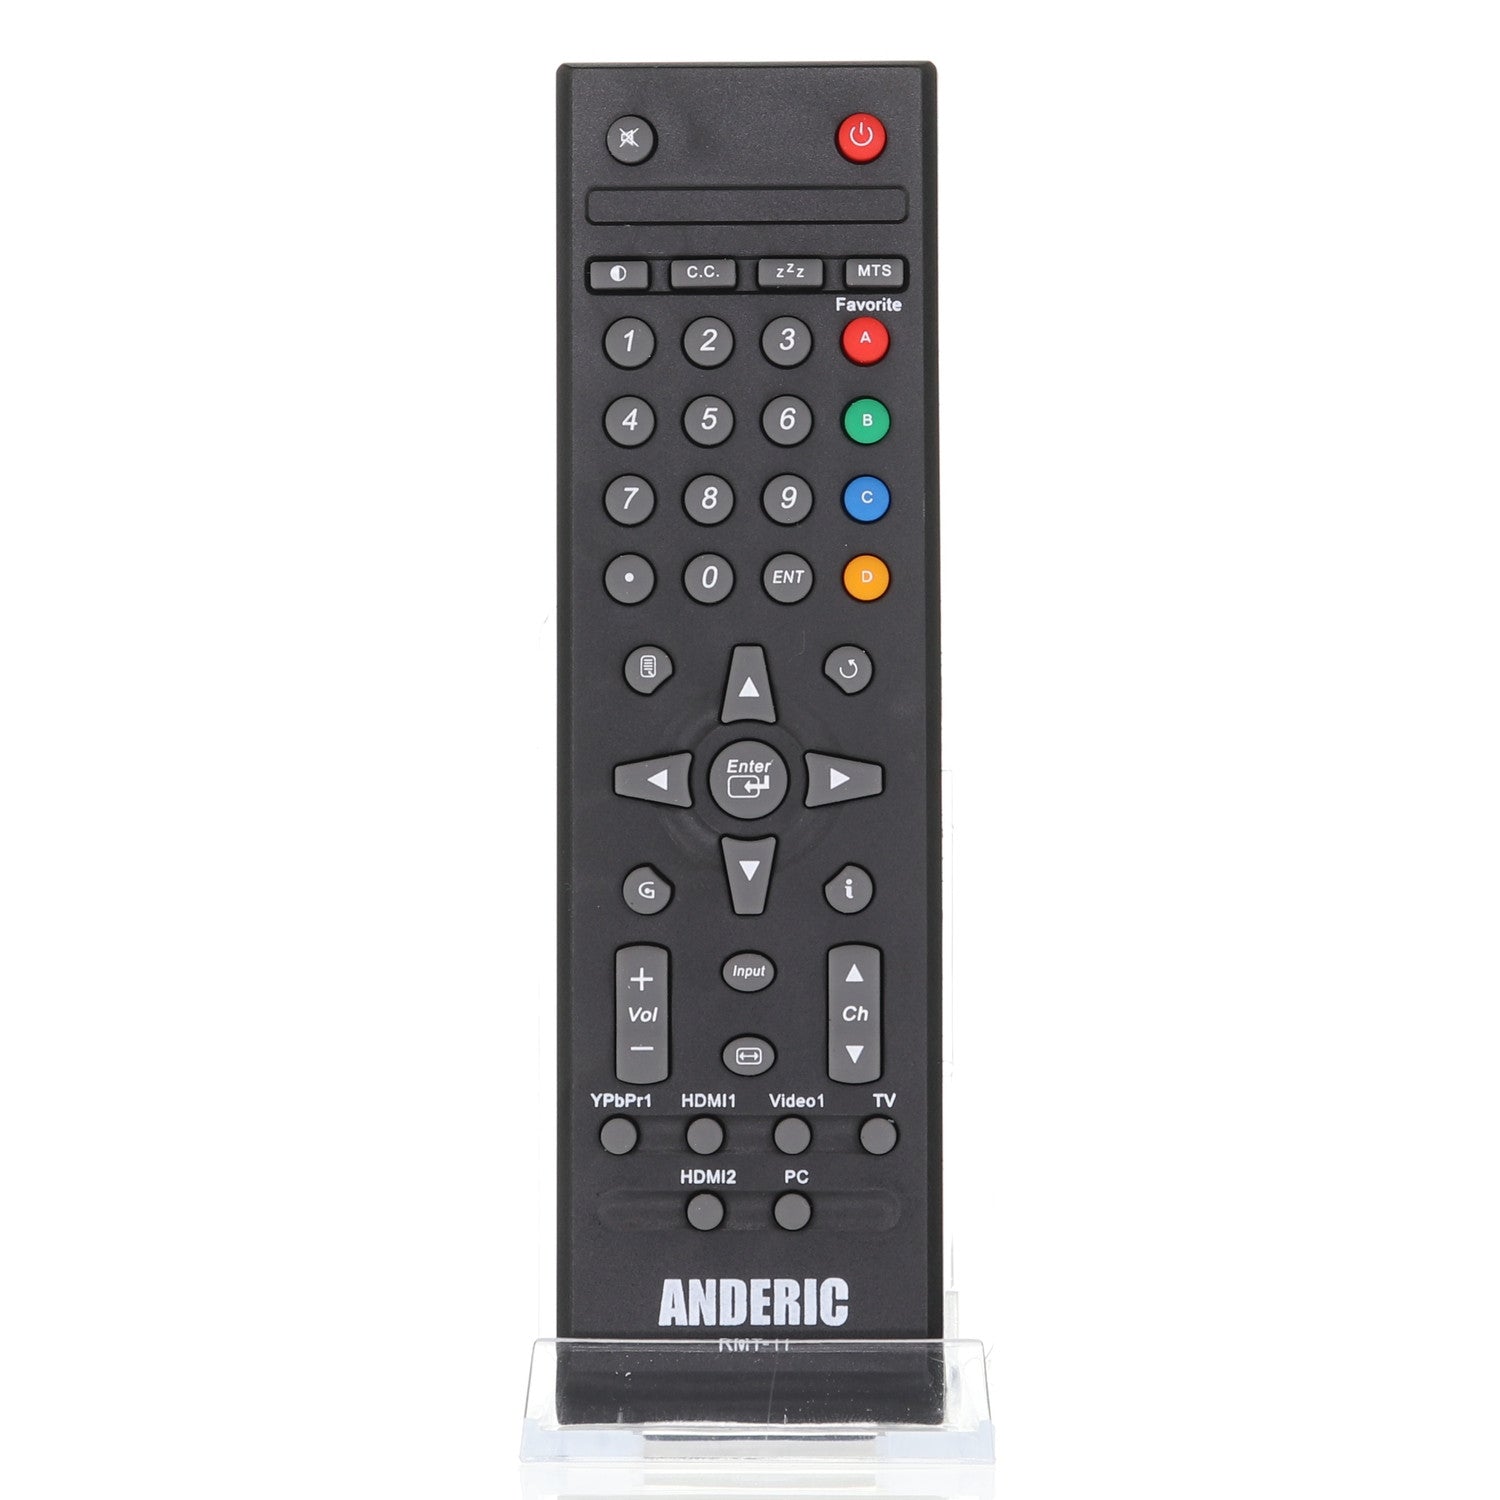 RMT11 Remote Control for Westinghouse® TVs